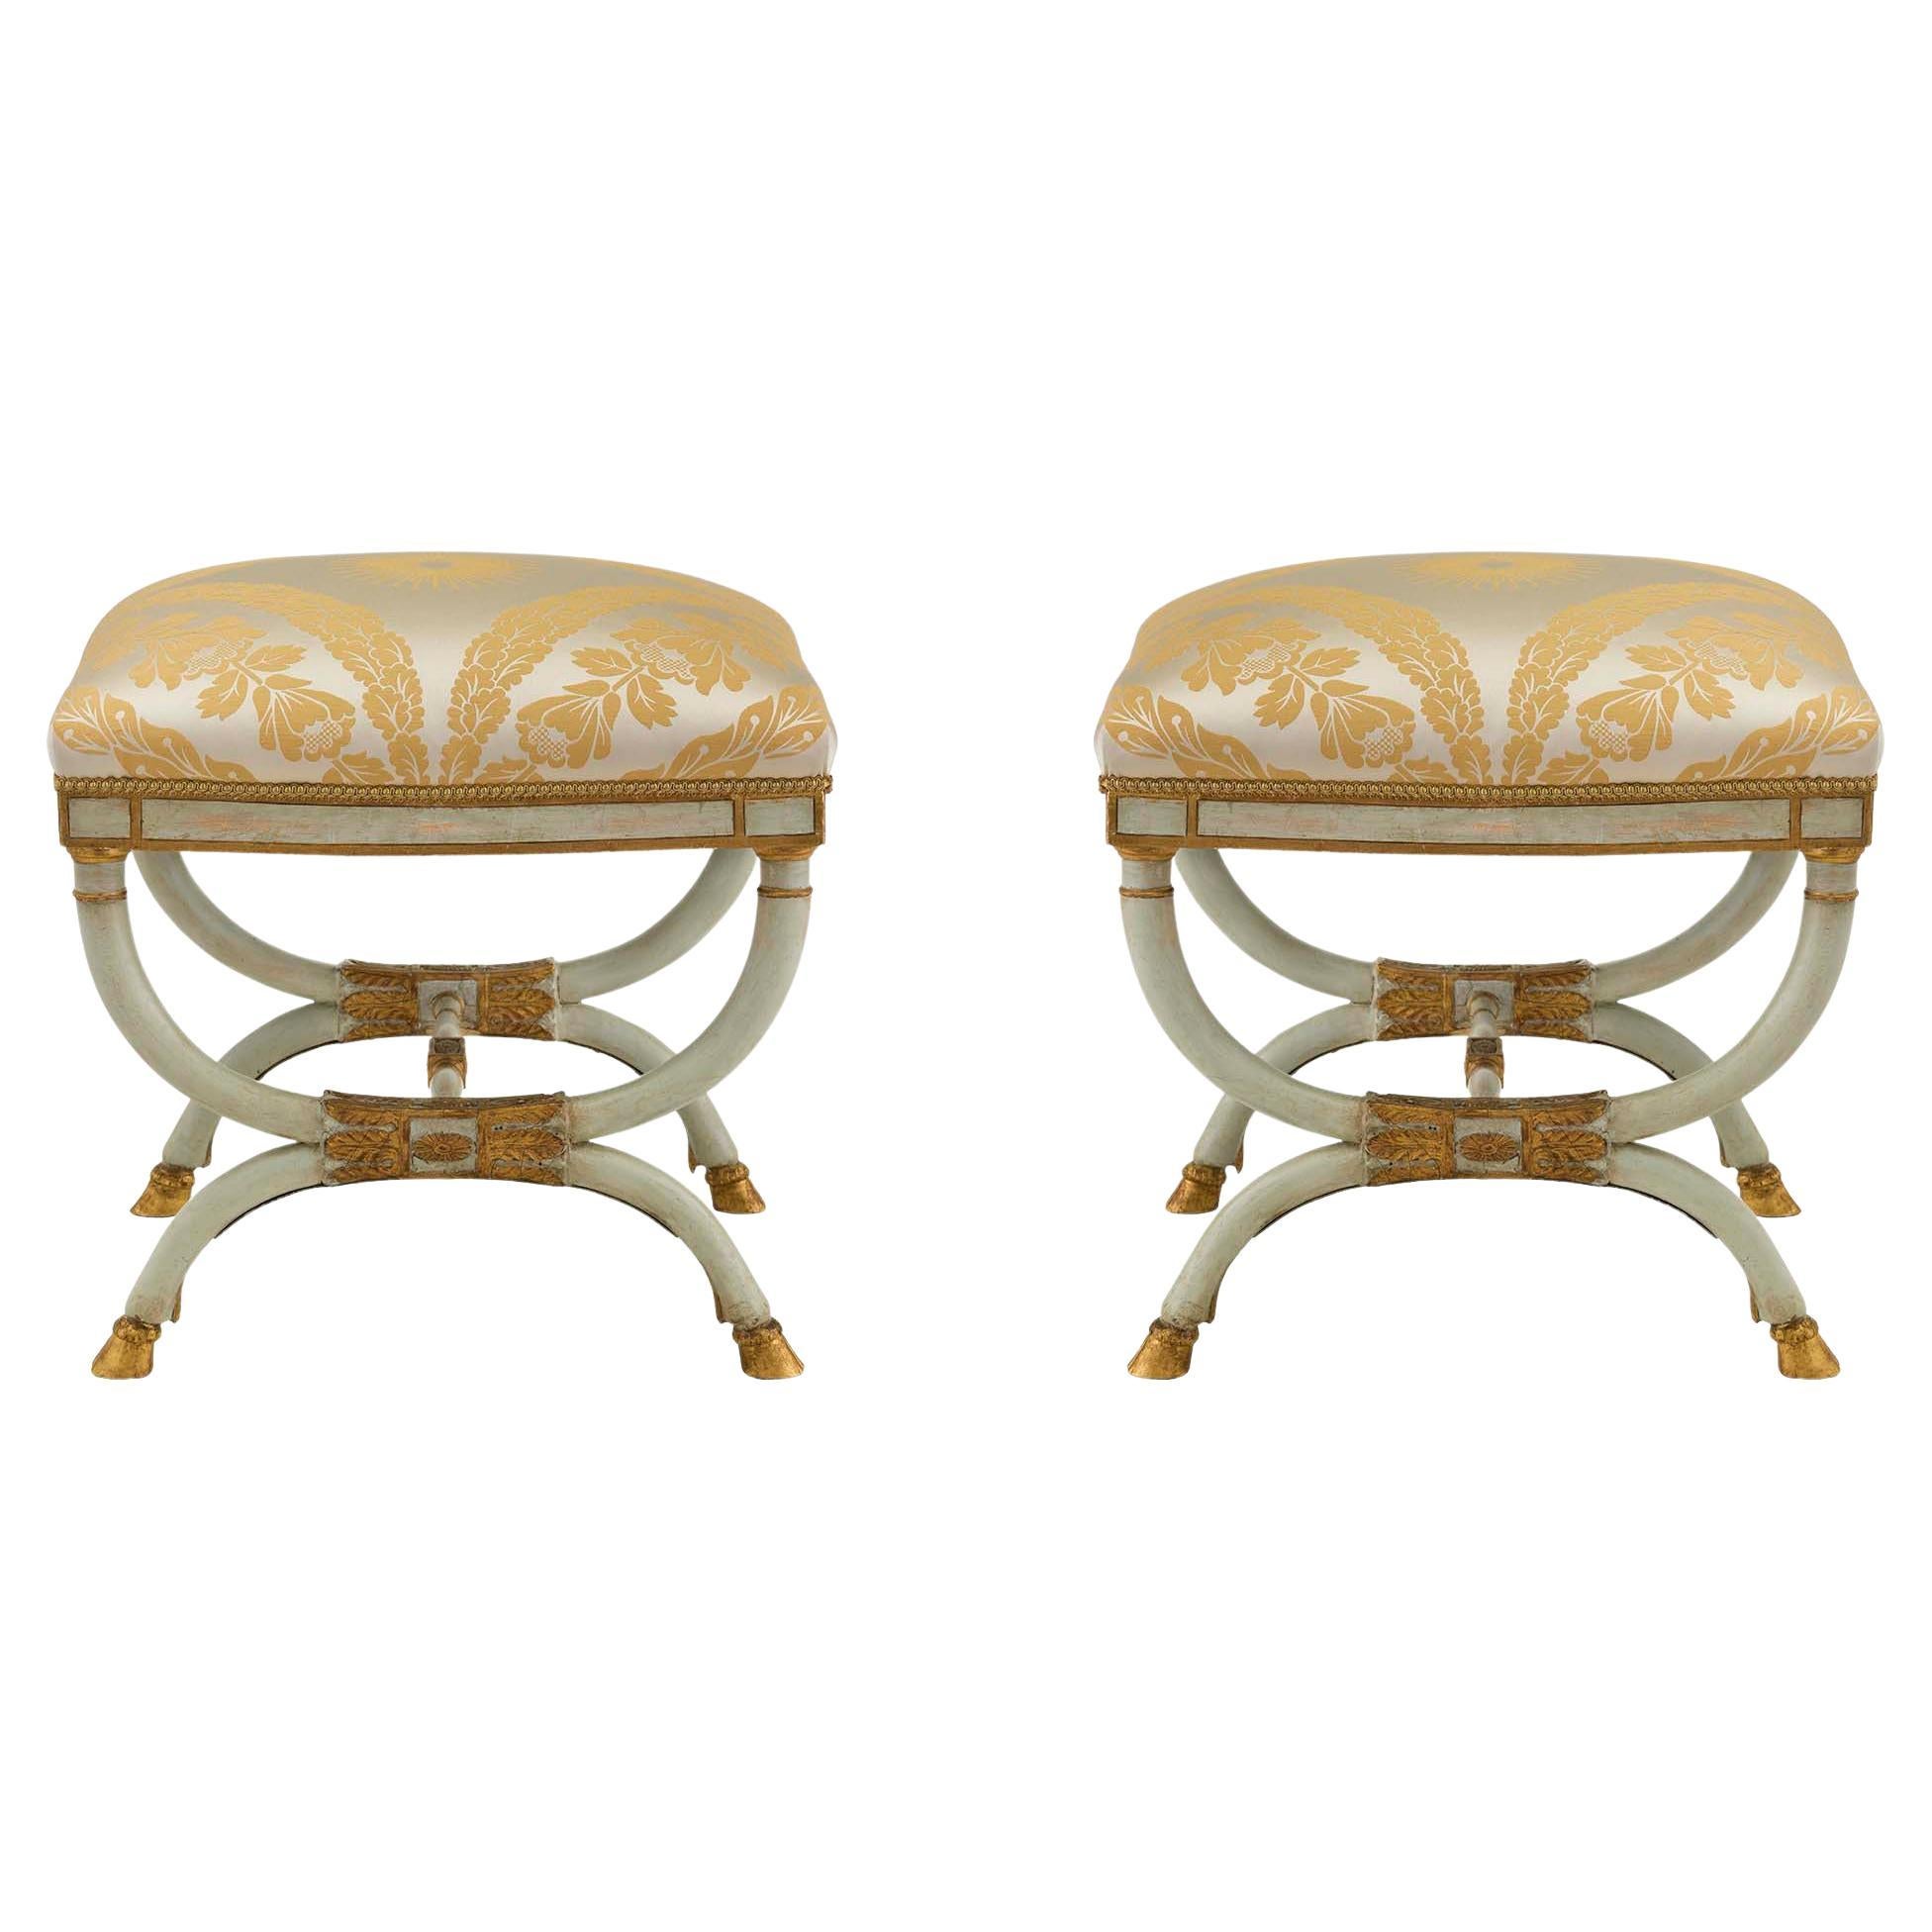 Pair of Italian Early 19th Century Neoclassical Style Patinated and Gilt Benches For Sale